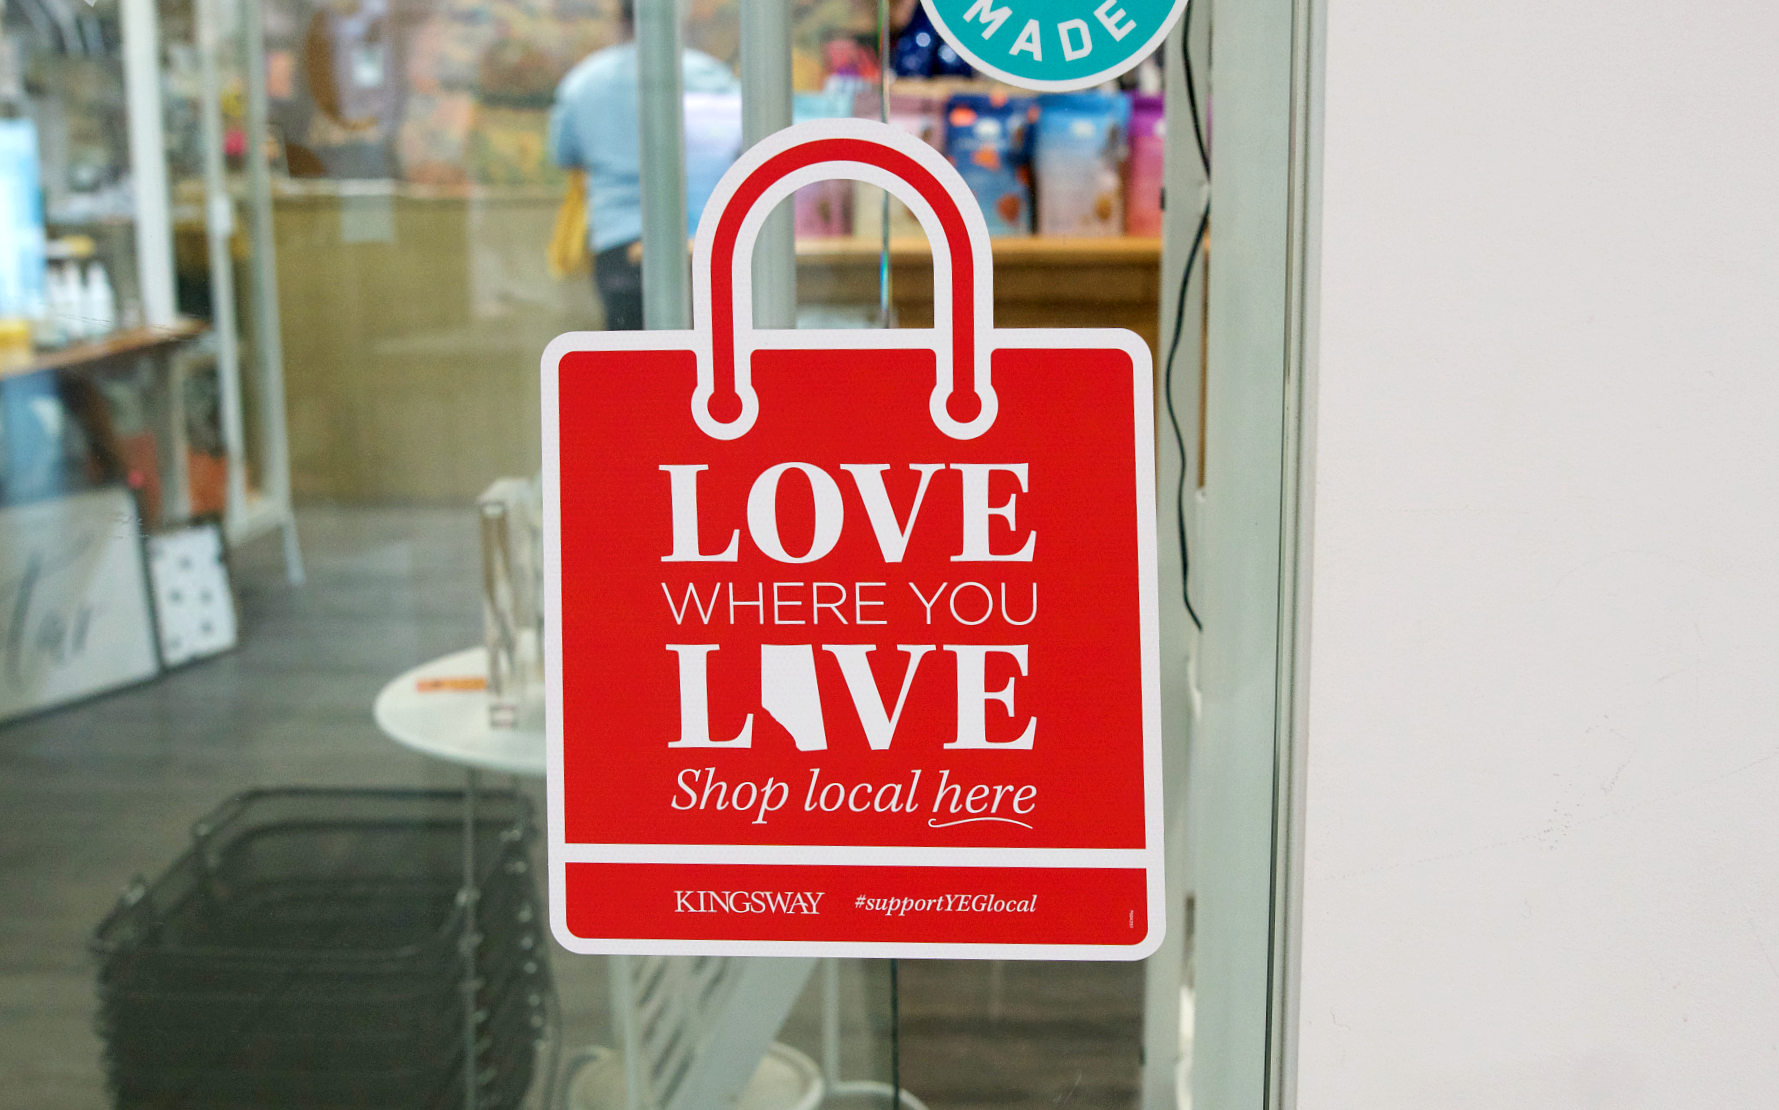 Red shopping bag window decal promoting shopping local with 'Love Where You Live' message